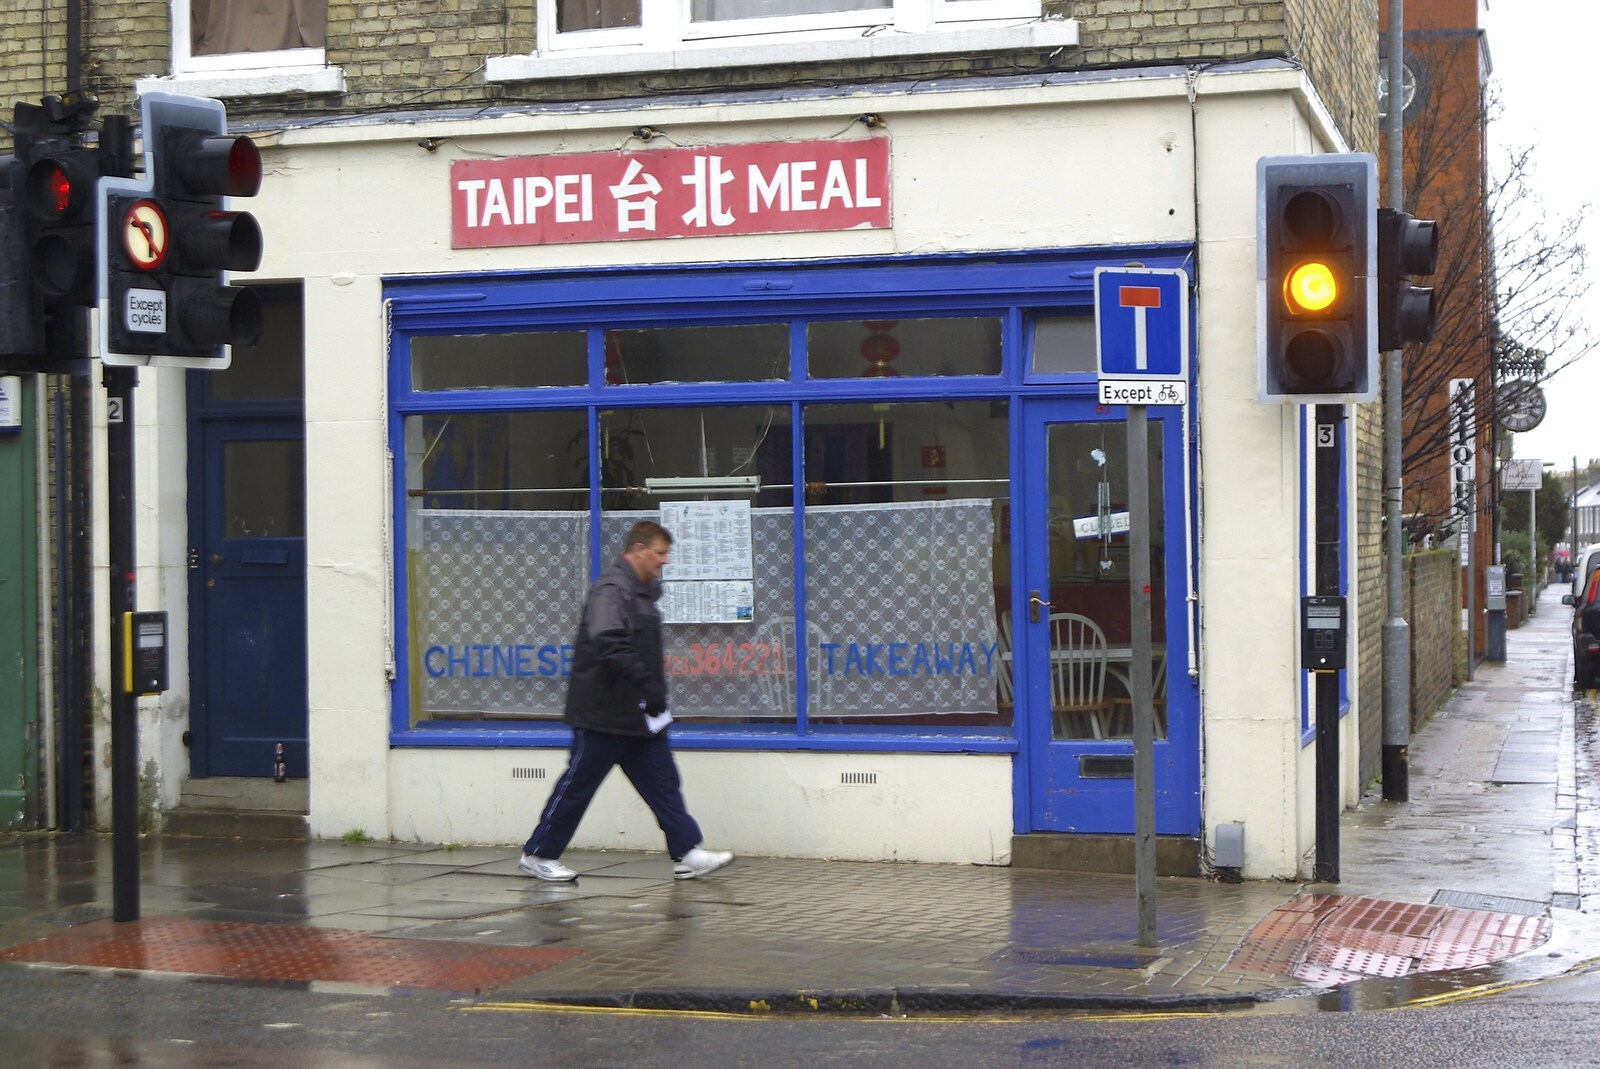 Taipei Meal on Mill Road in Cambridge from Taptu: A New Start-up, and The BBs at the Apollo Rooms, Harleston - 3rd February 2007